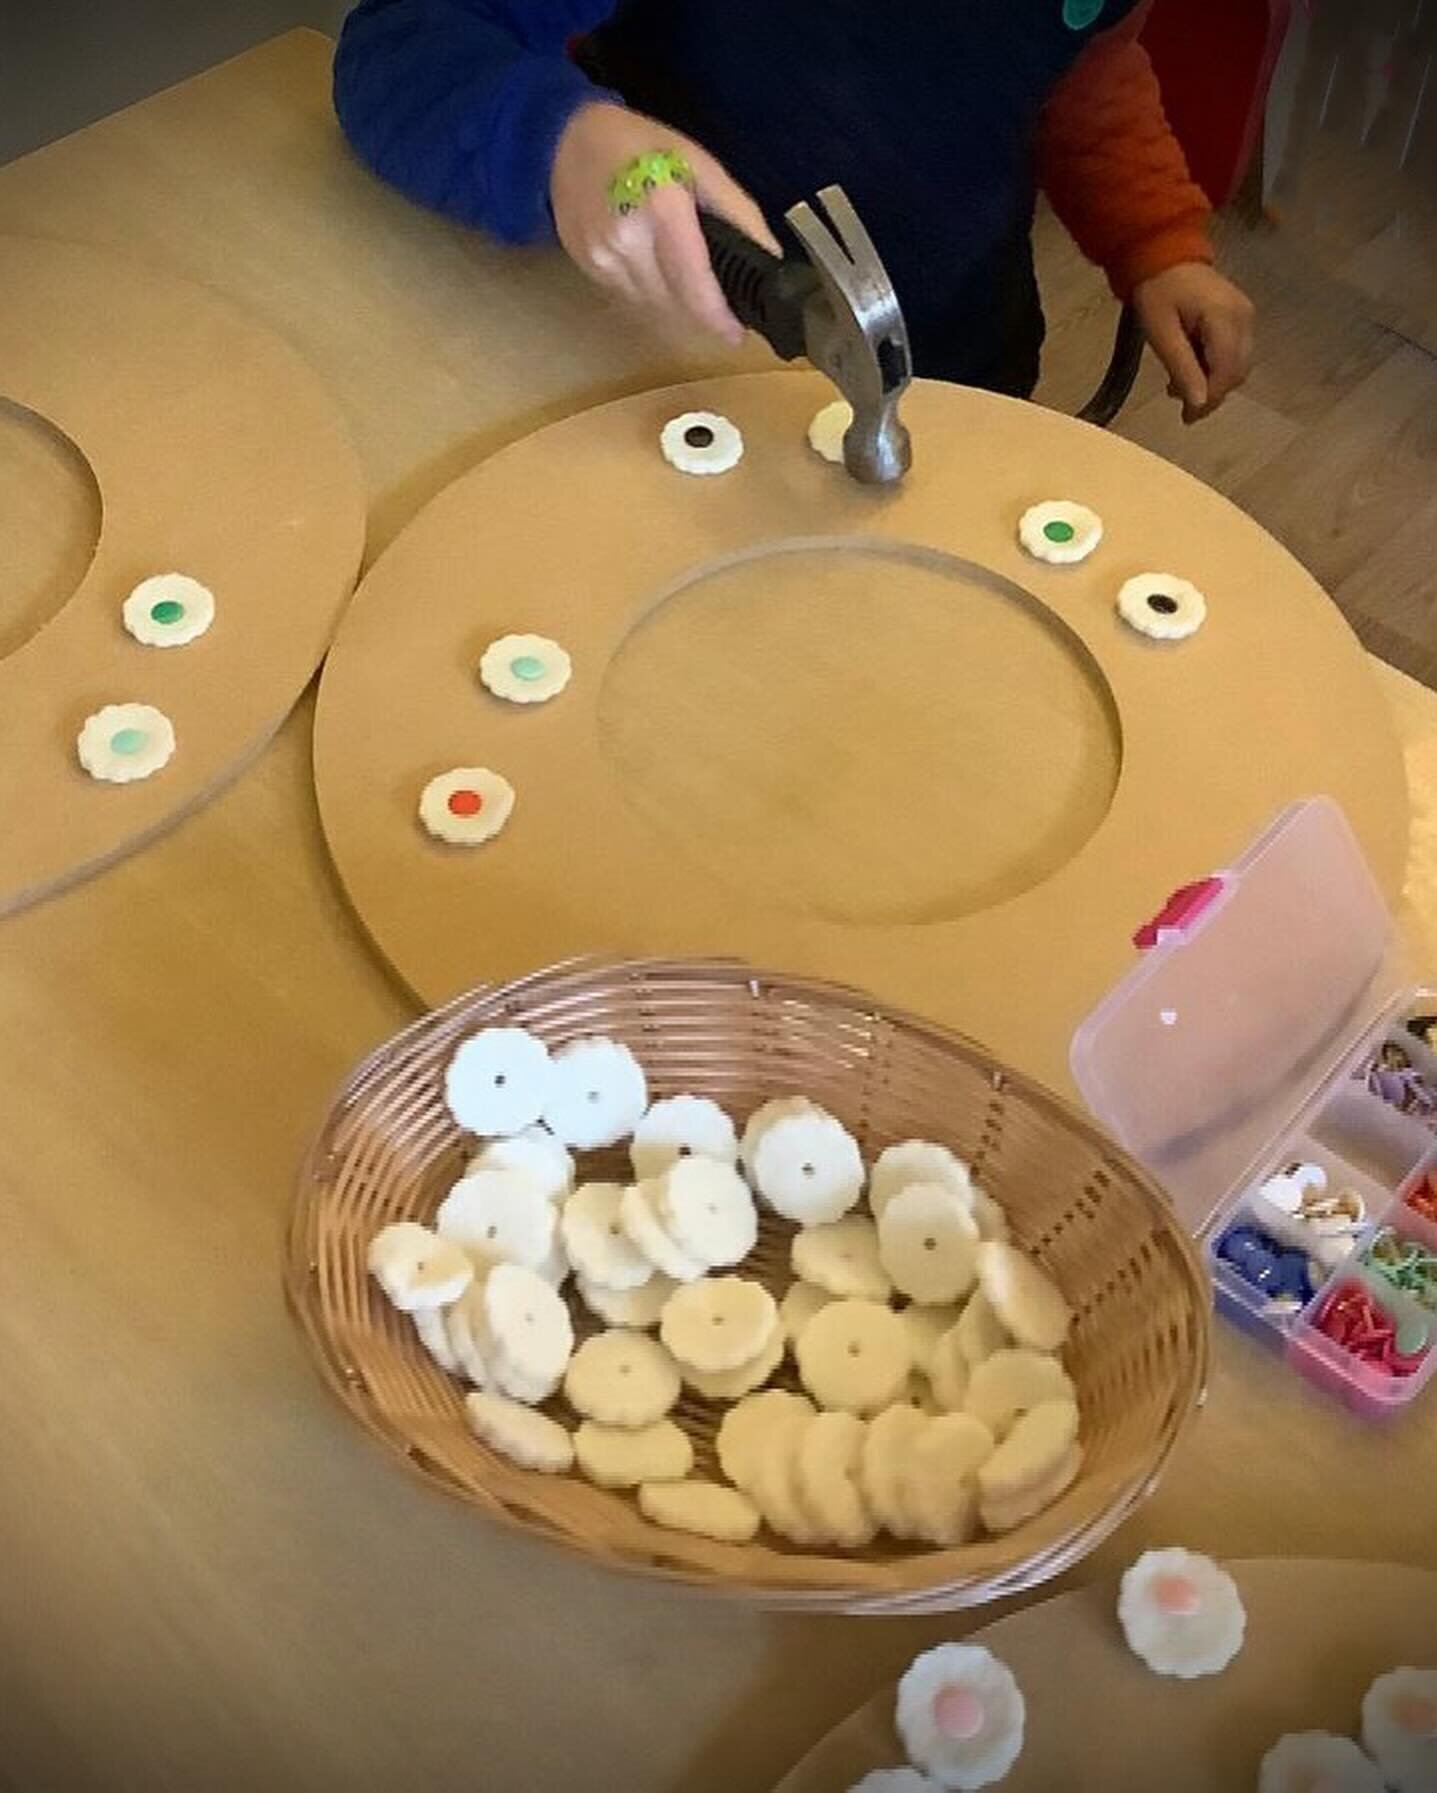 Using real tools, drawing pins &amp; natural materials&hellip;just wonderful!
..
..
Hammering helps children develop the fine motor skills required to grasp nails/drawing pins and hammers. 
It develops the movements and hand-eye coordination needed f